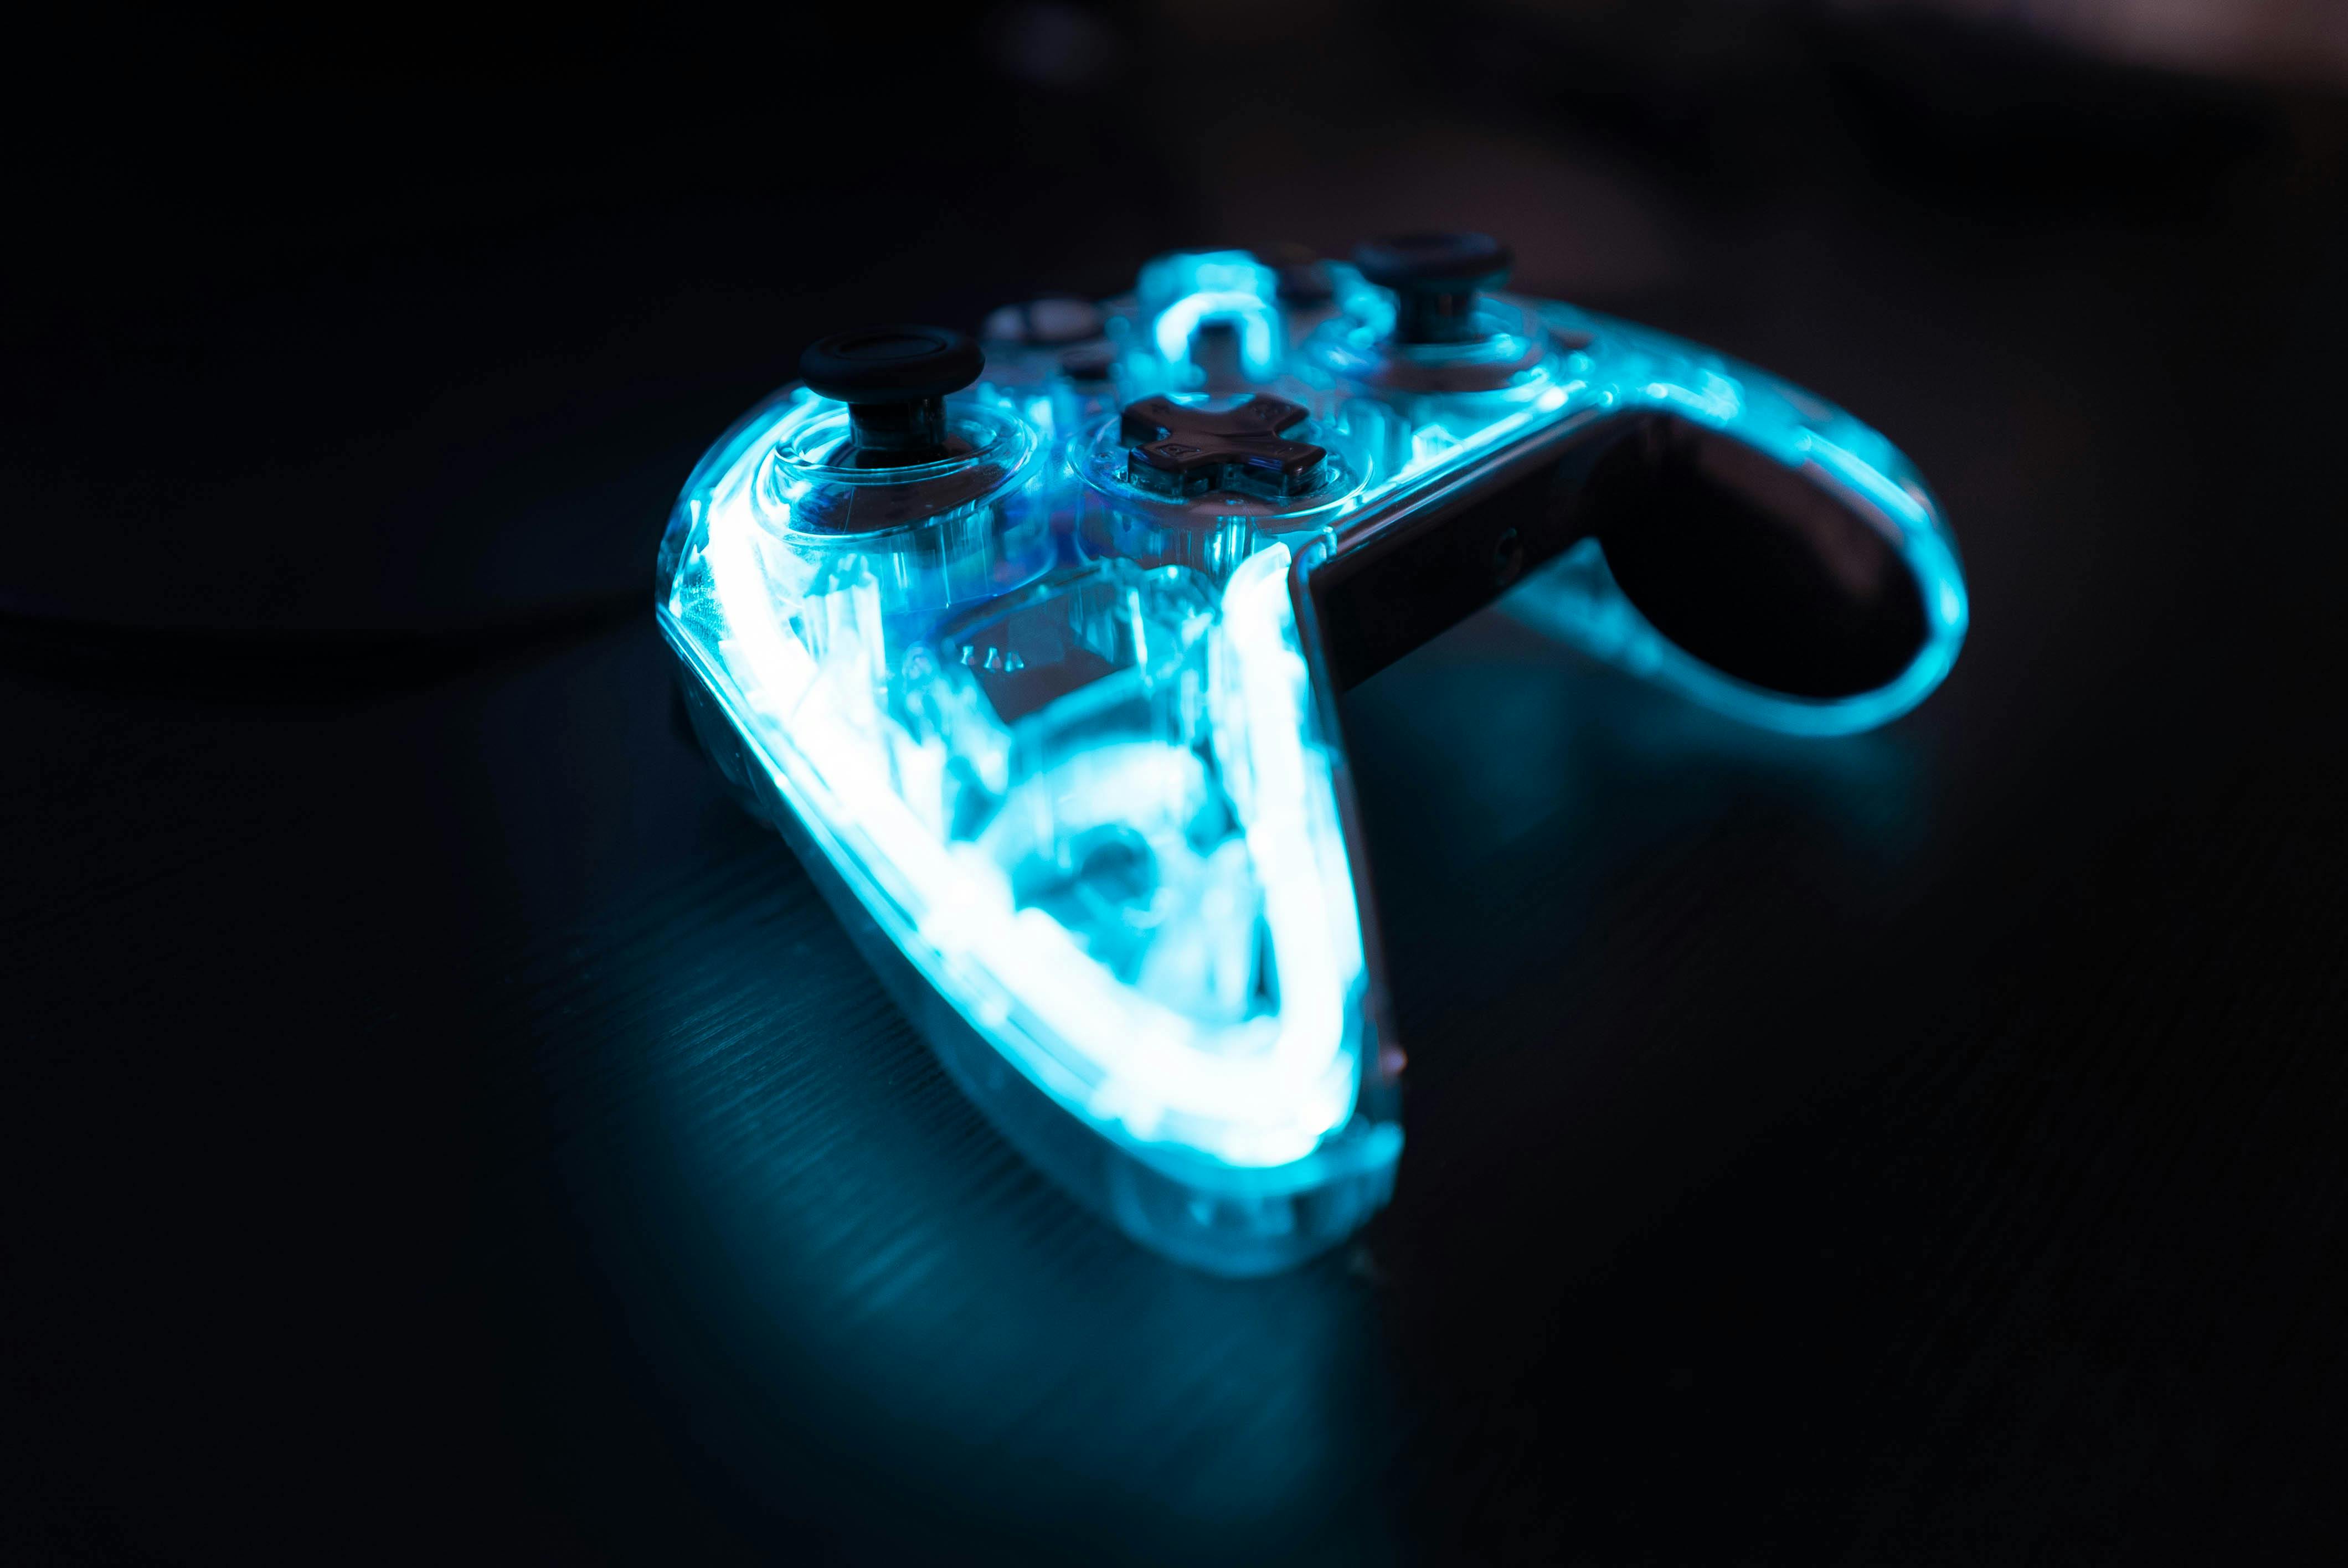 1000 Gaming Controller Pictures  Download Free Images on Unsplash